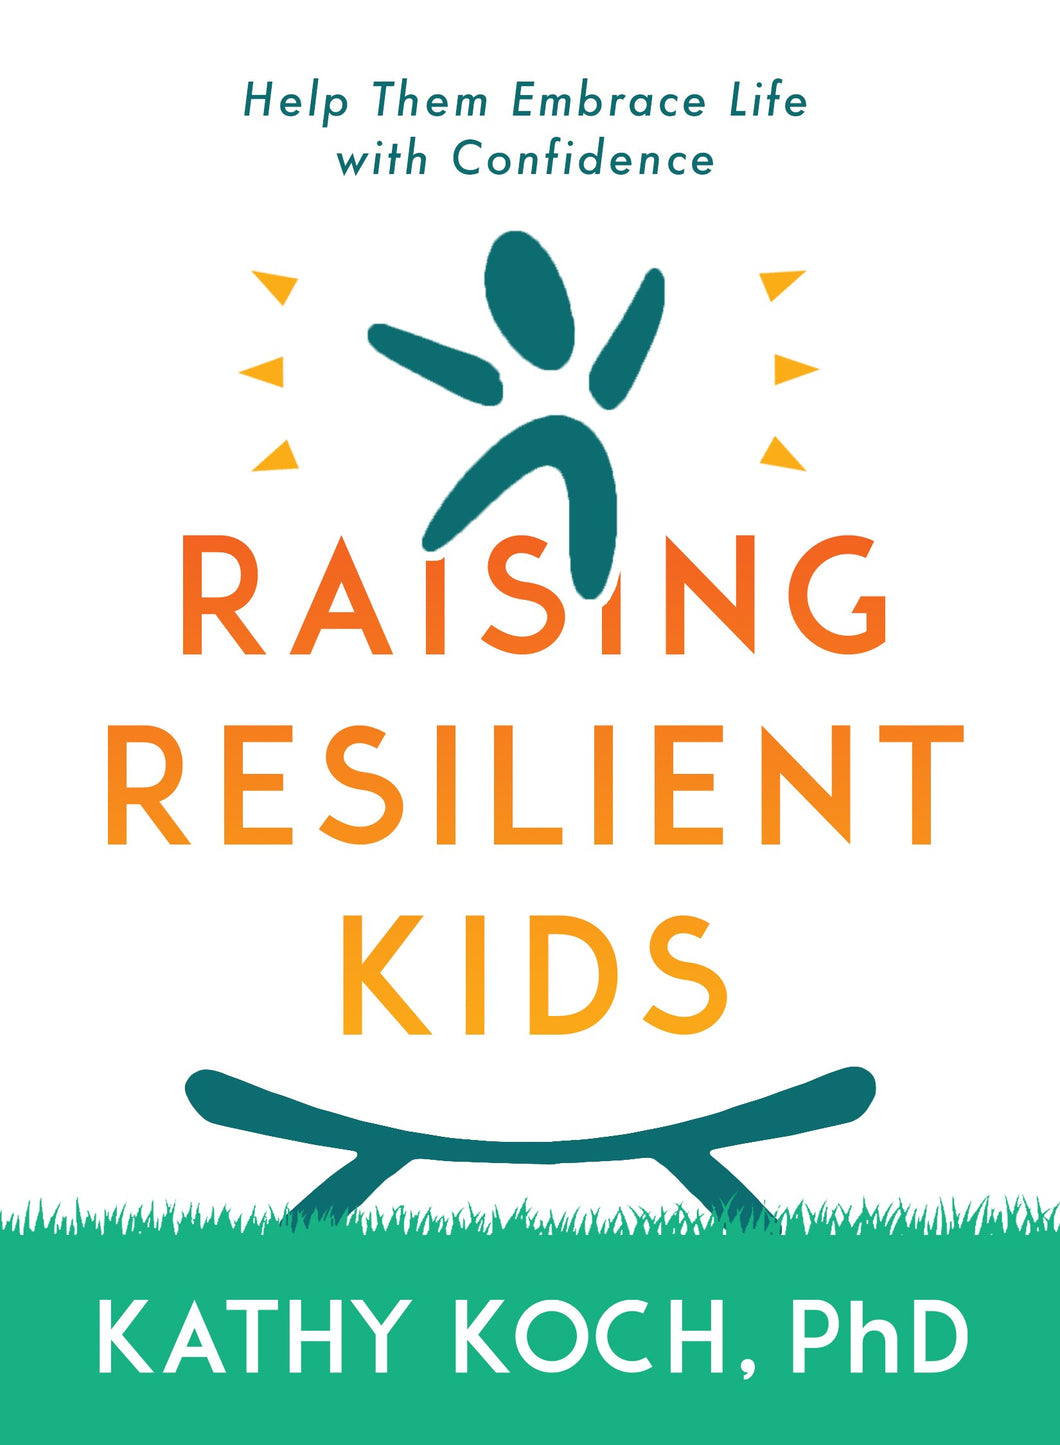 Resilient Kids